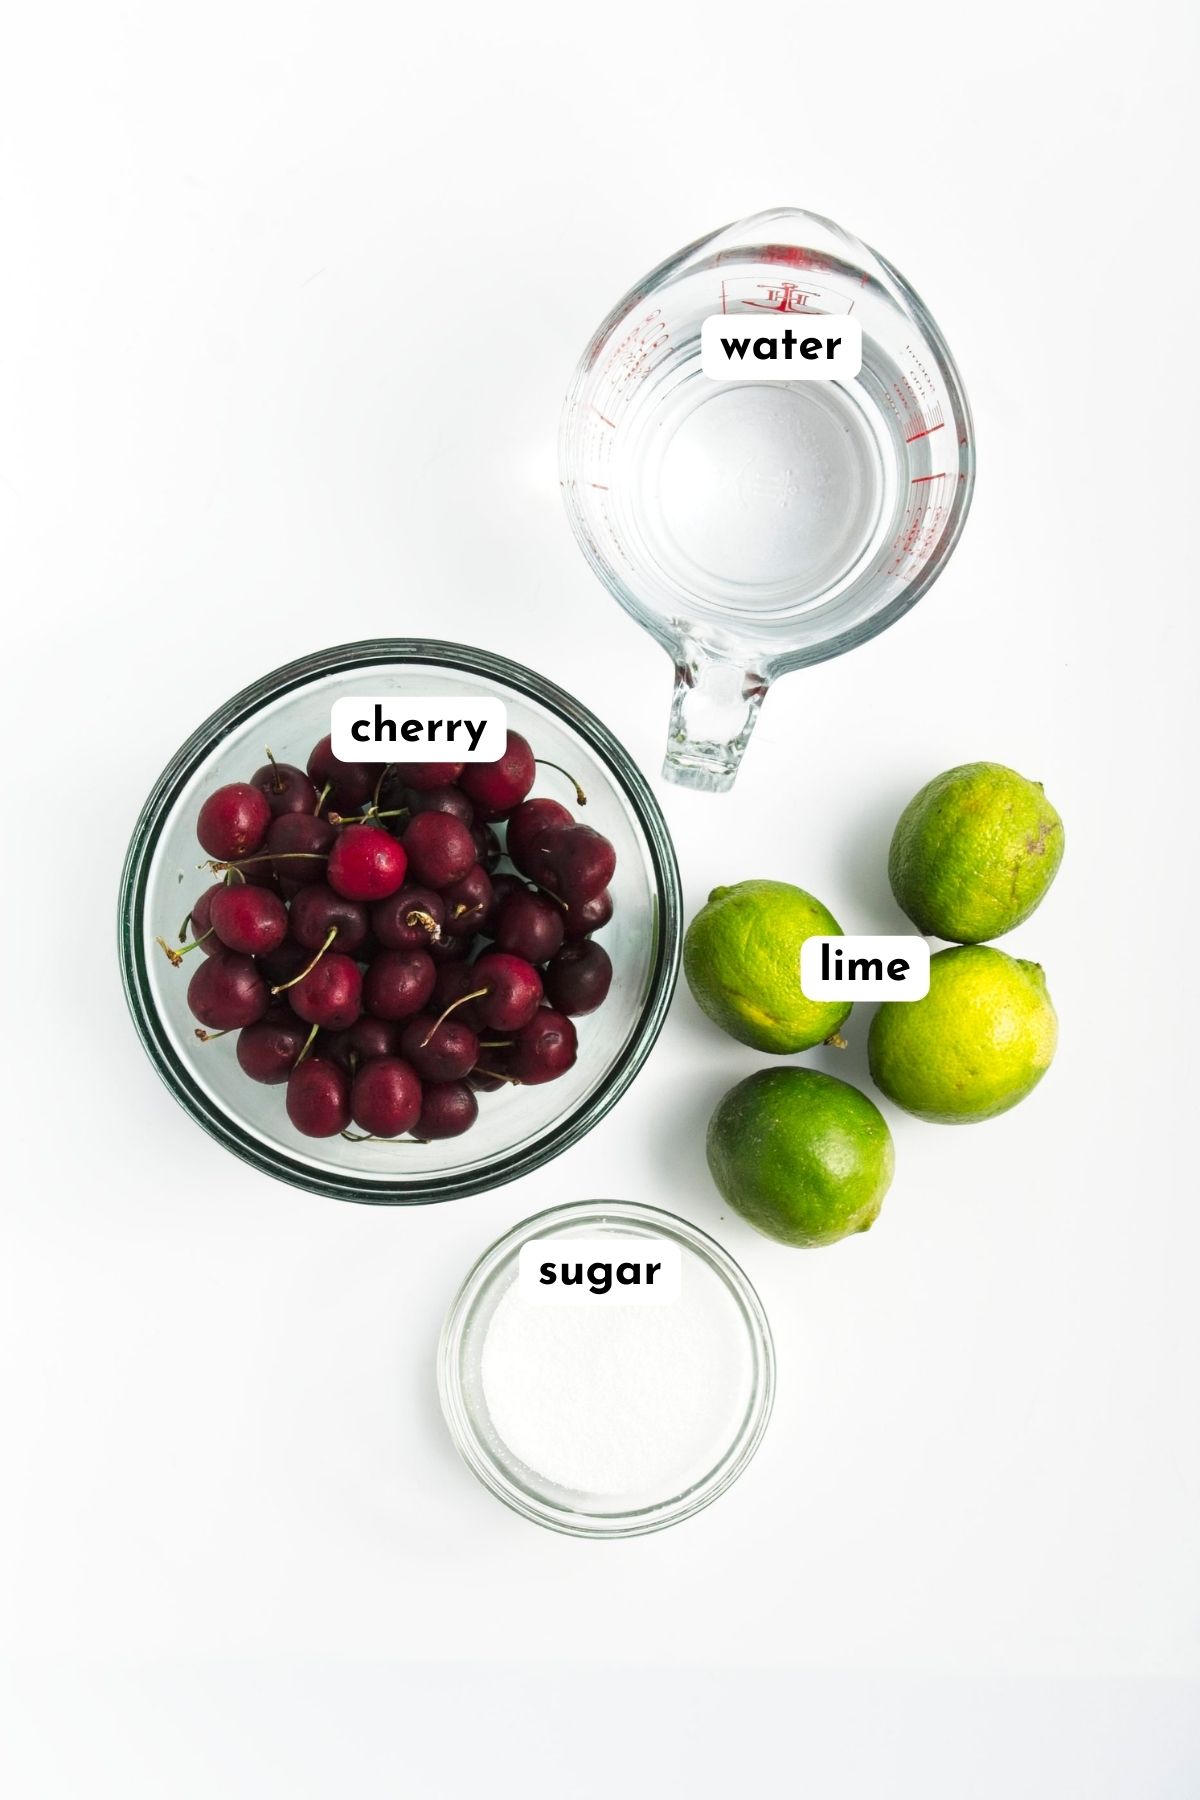 Ingredients of cherry popsicles on a white surface like jug of water, bowl of cherries, 4 limes, and a small bowl of white sugar